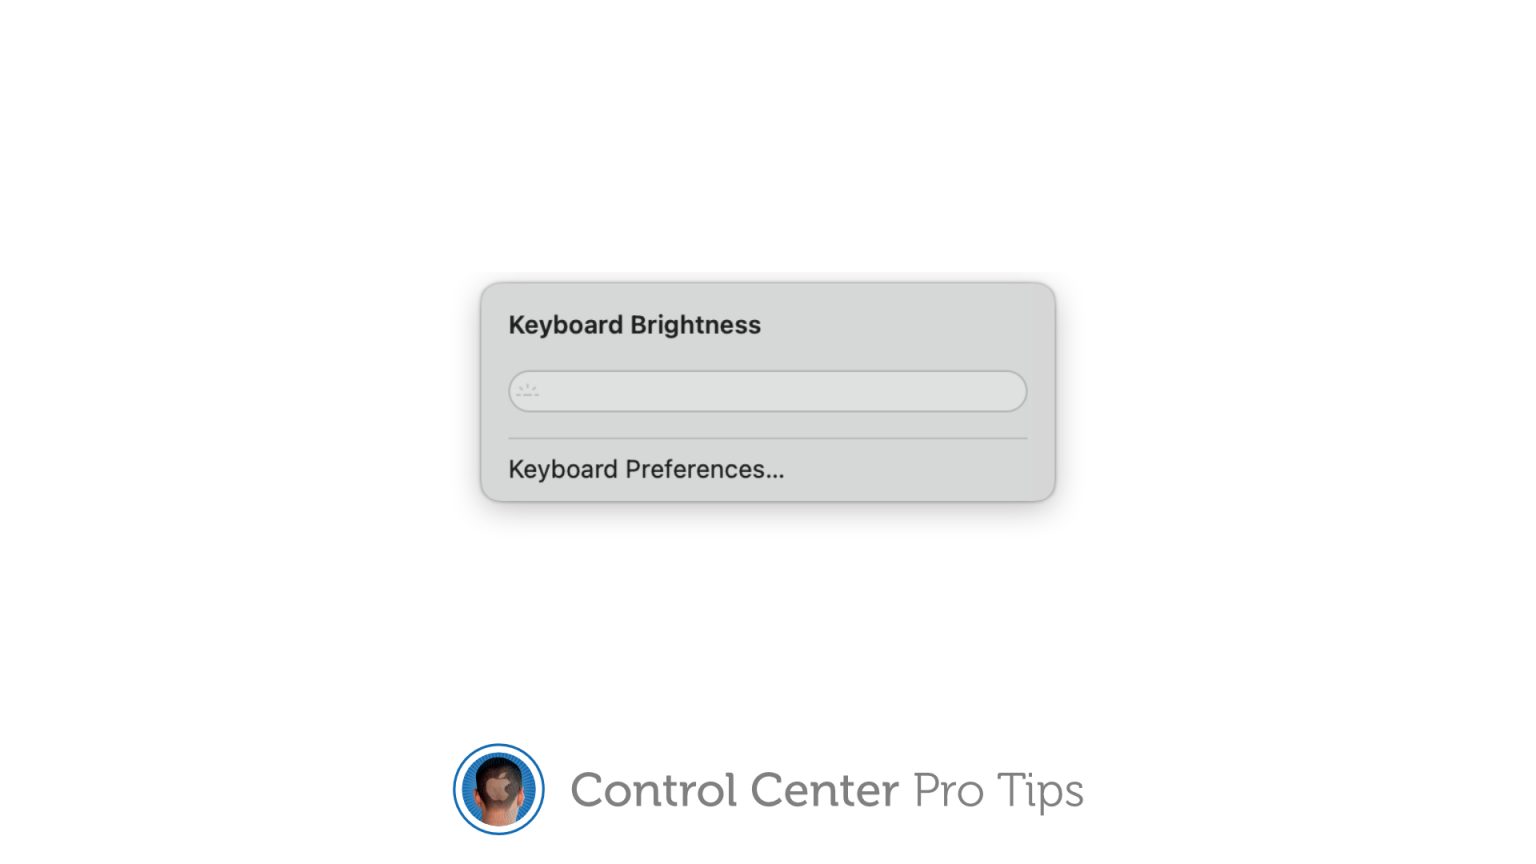 How to adjust keyboard brightness using Control Center